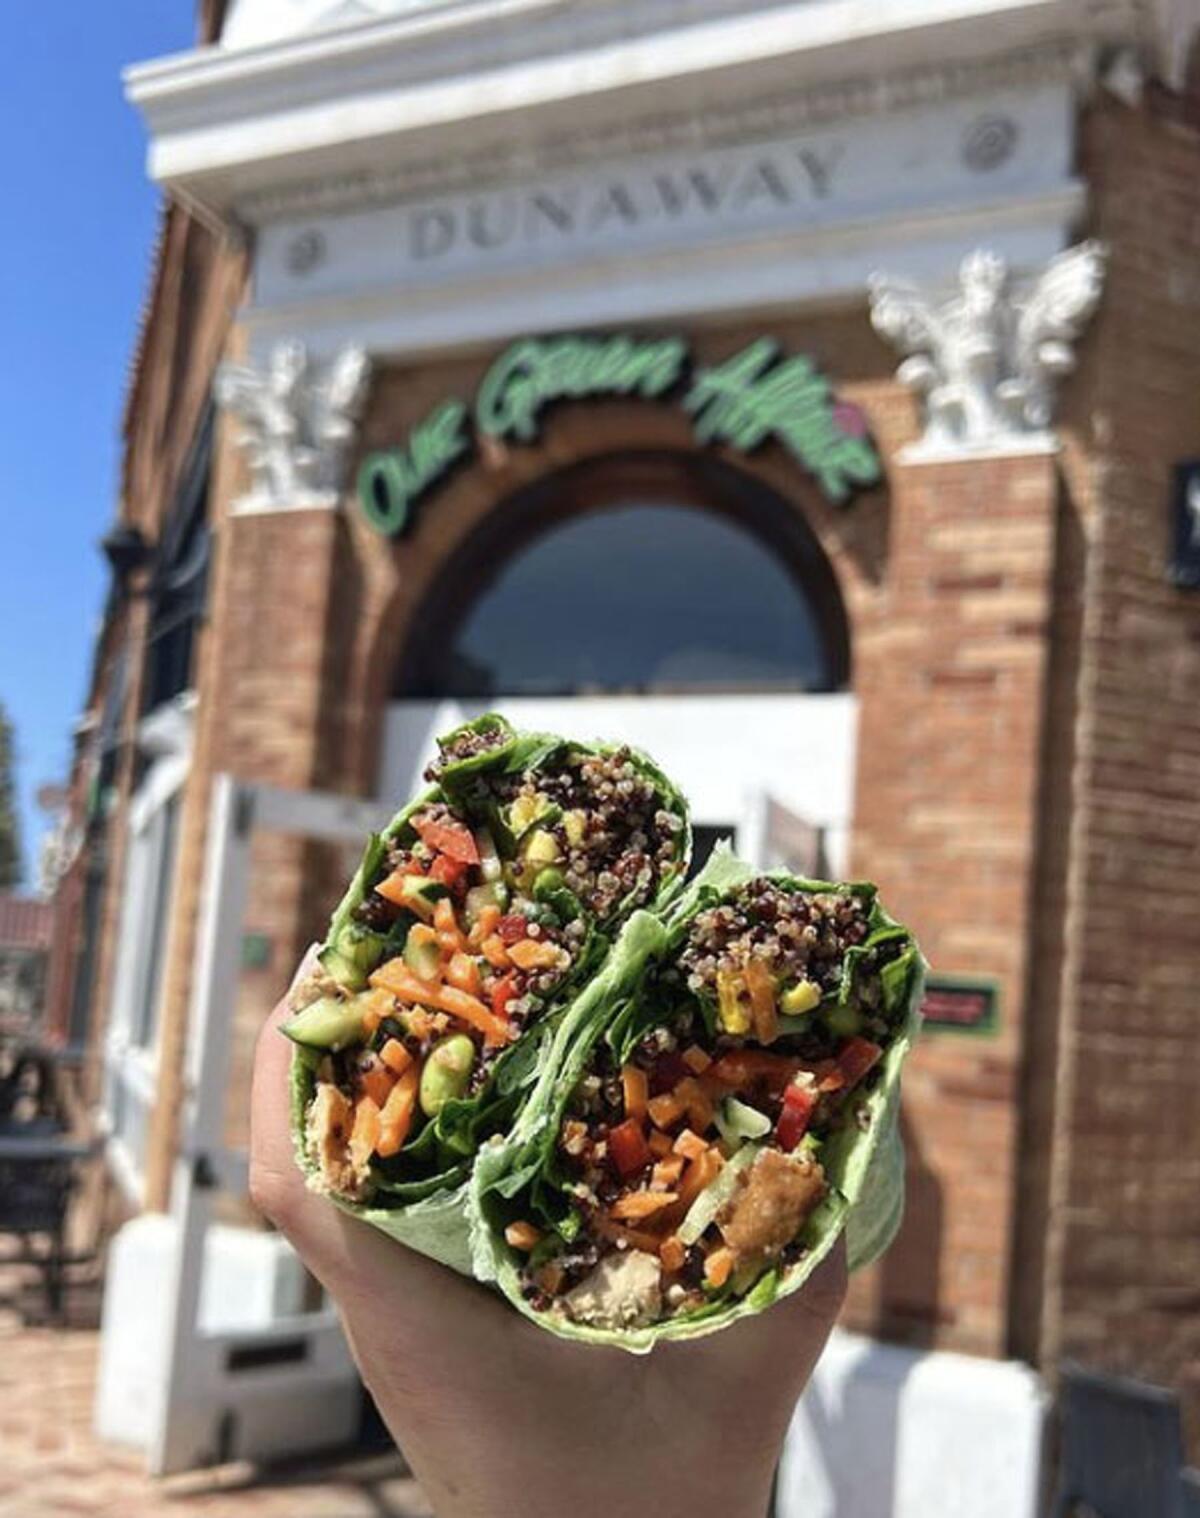 The Hot Chick wrap at Our Green Affair has a base of spinach and quinoa.